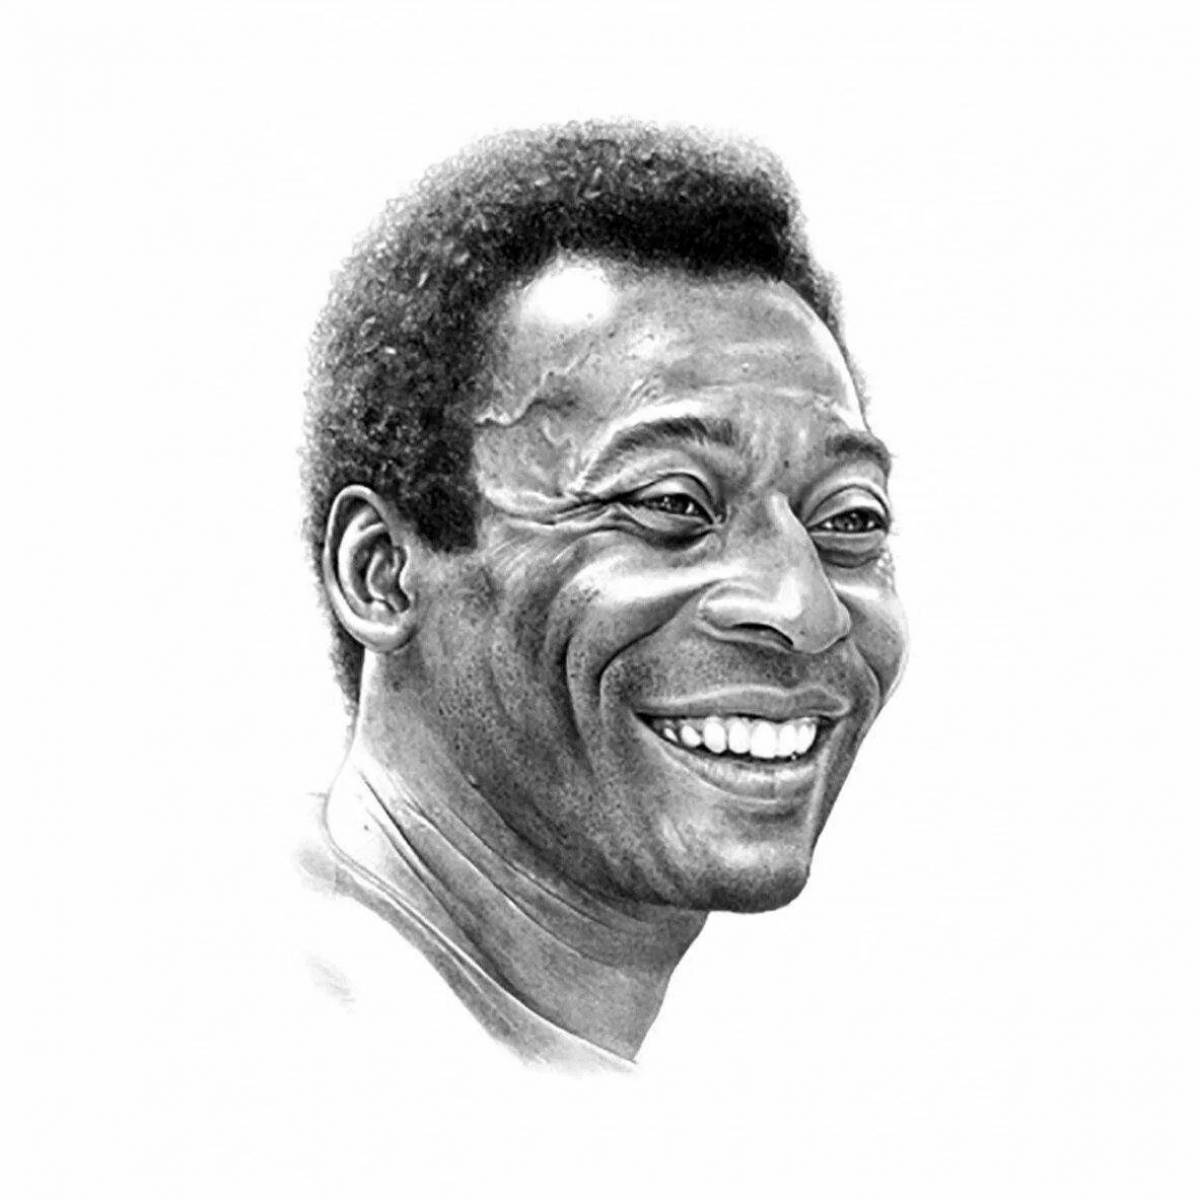 Pele's exquisite soccer player coloring page